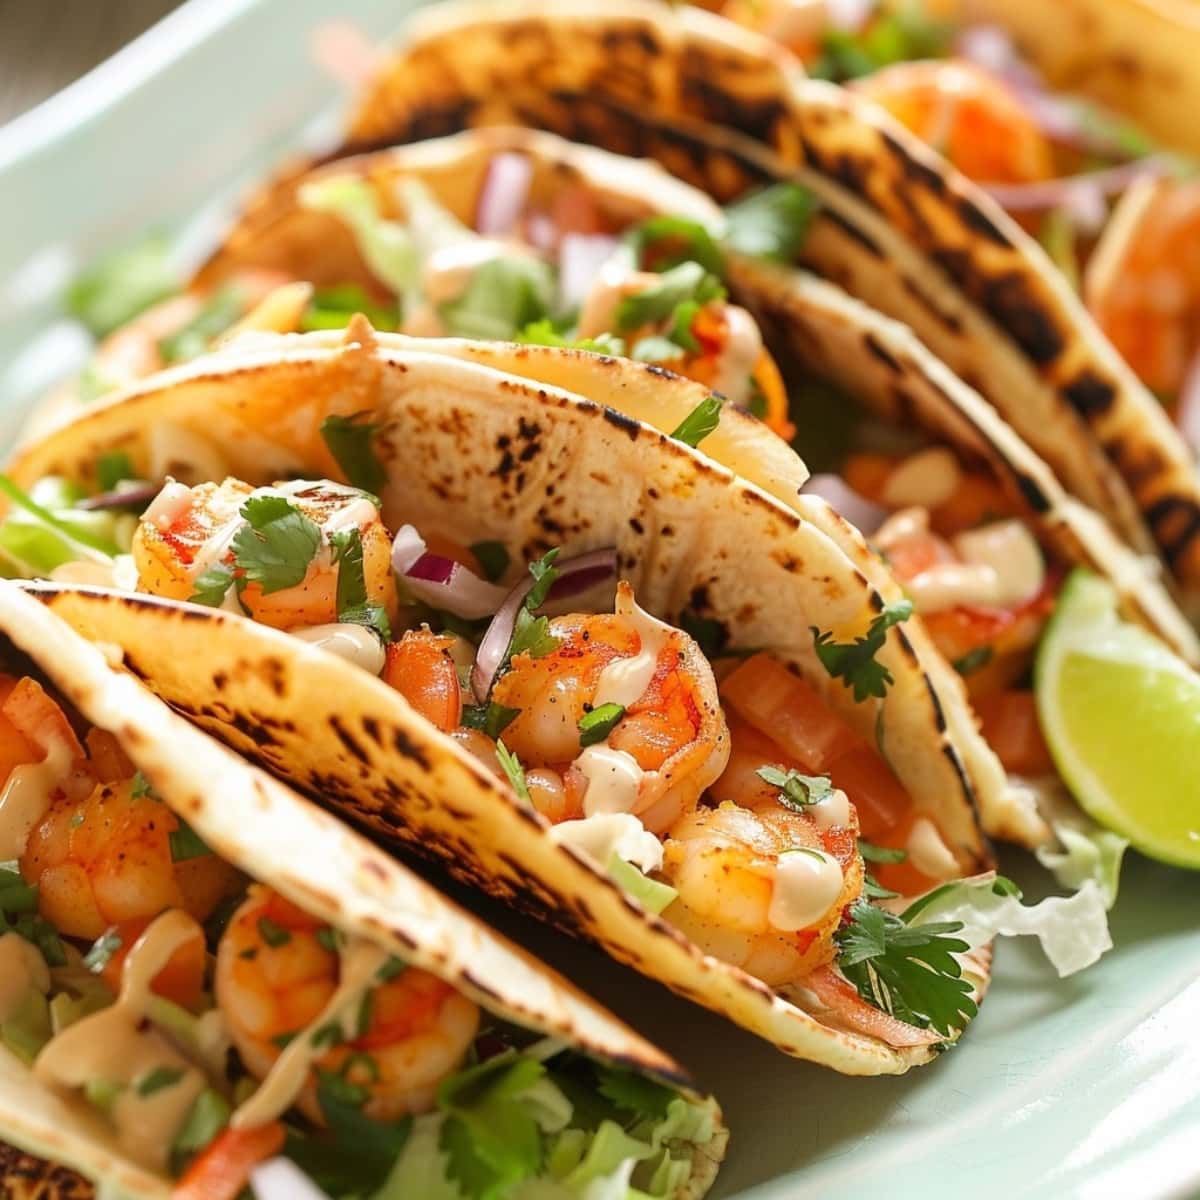 Shrimp tacos with salsa and lime slice on the side.